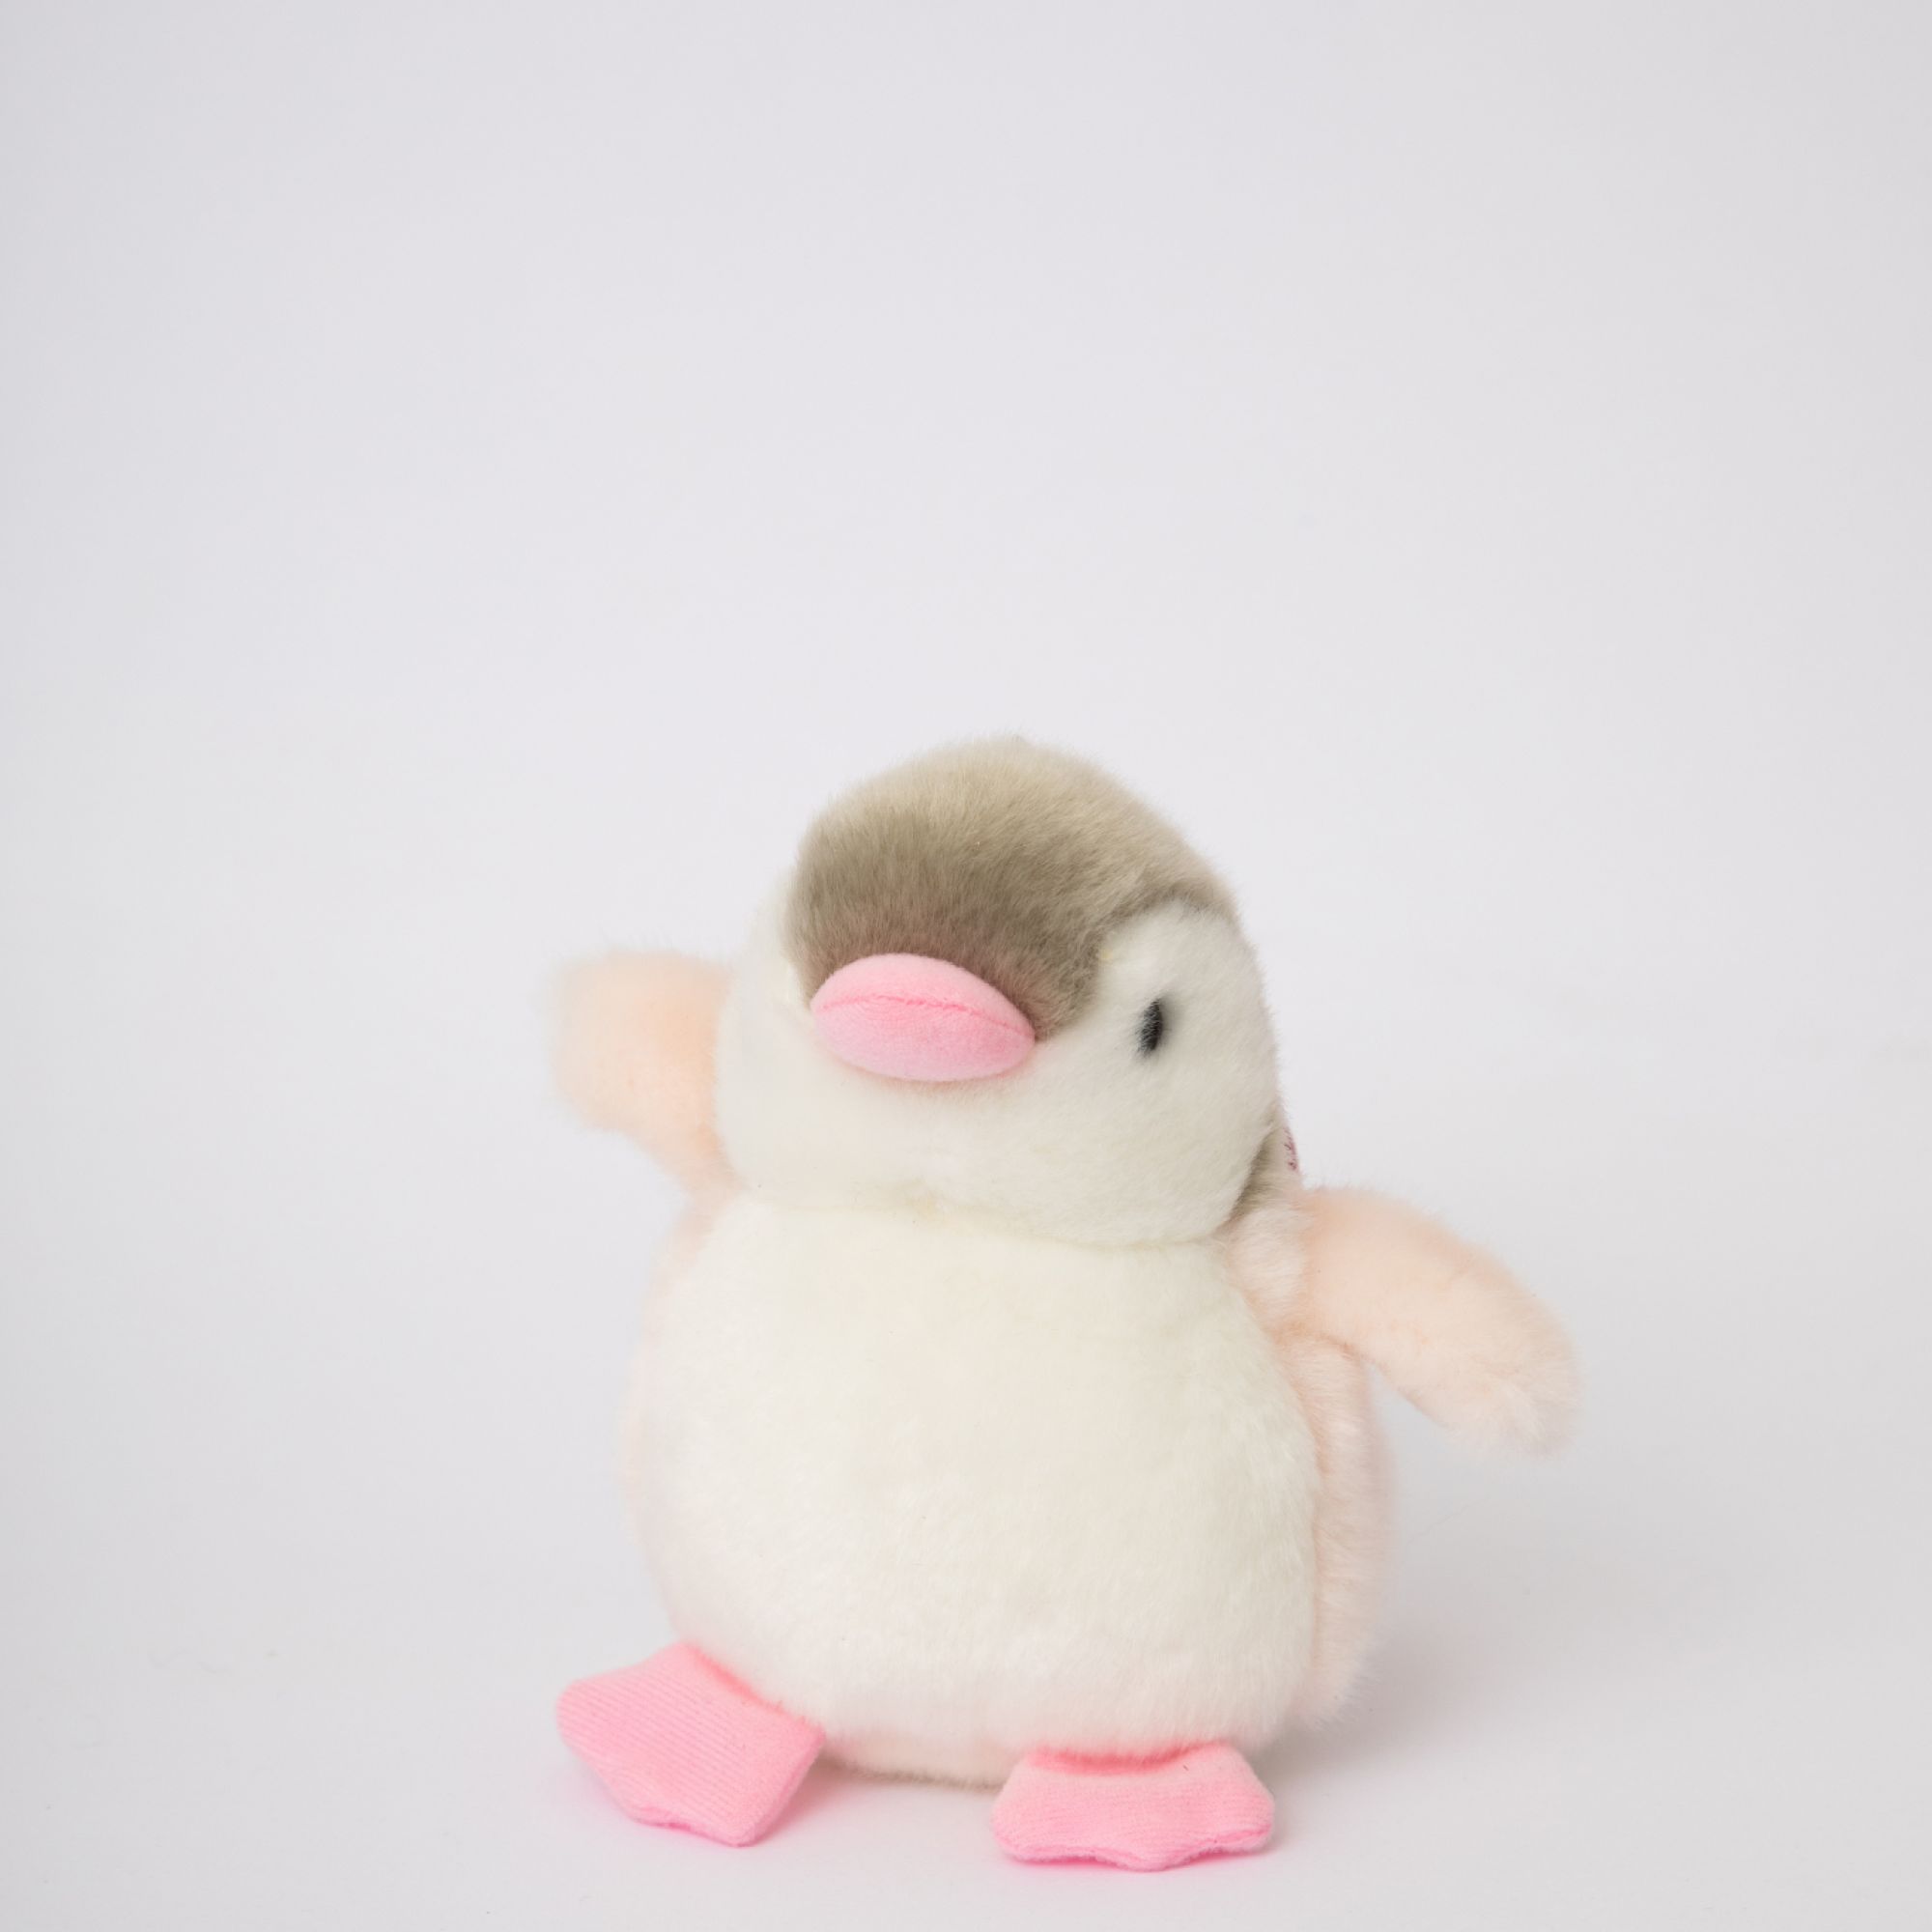 Penguin Bird Island Black White and Pink Small